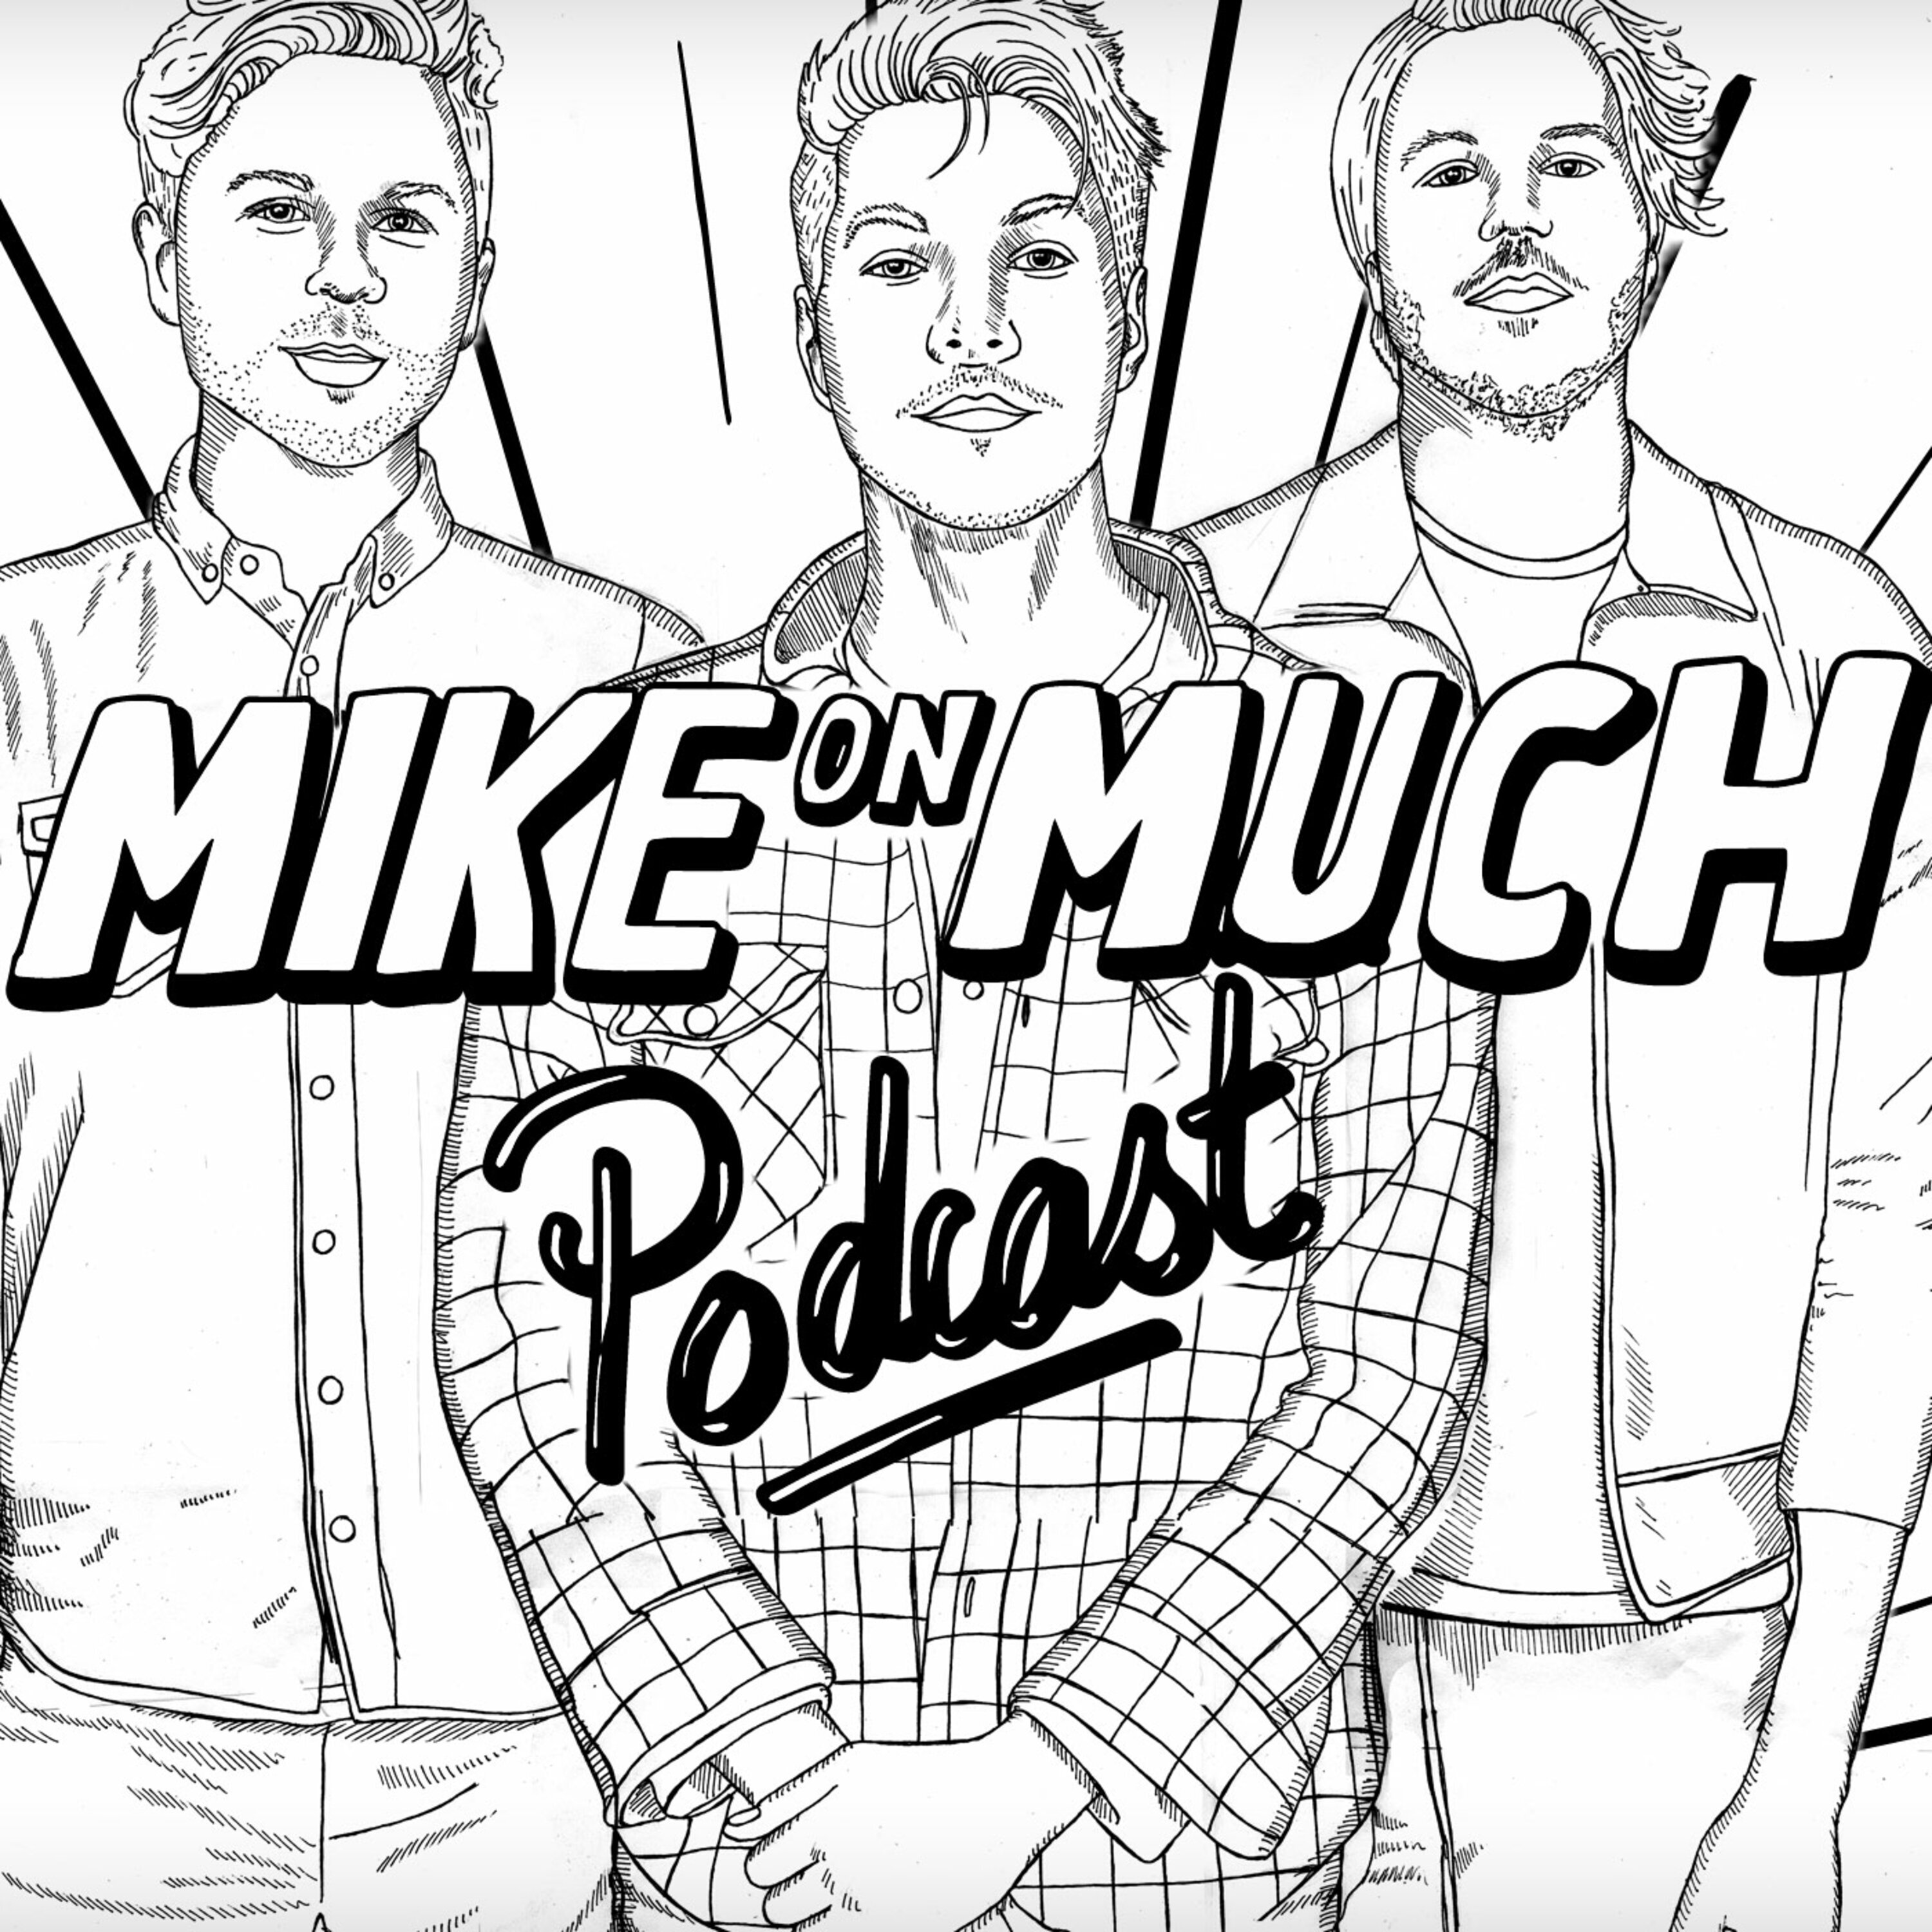 Season 1 Mike On Much: ”Hit Me On My Two-Way!”